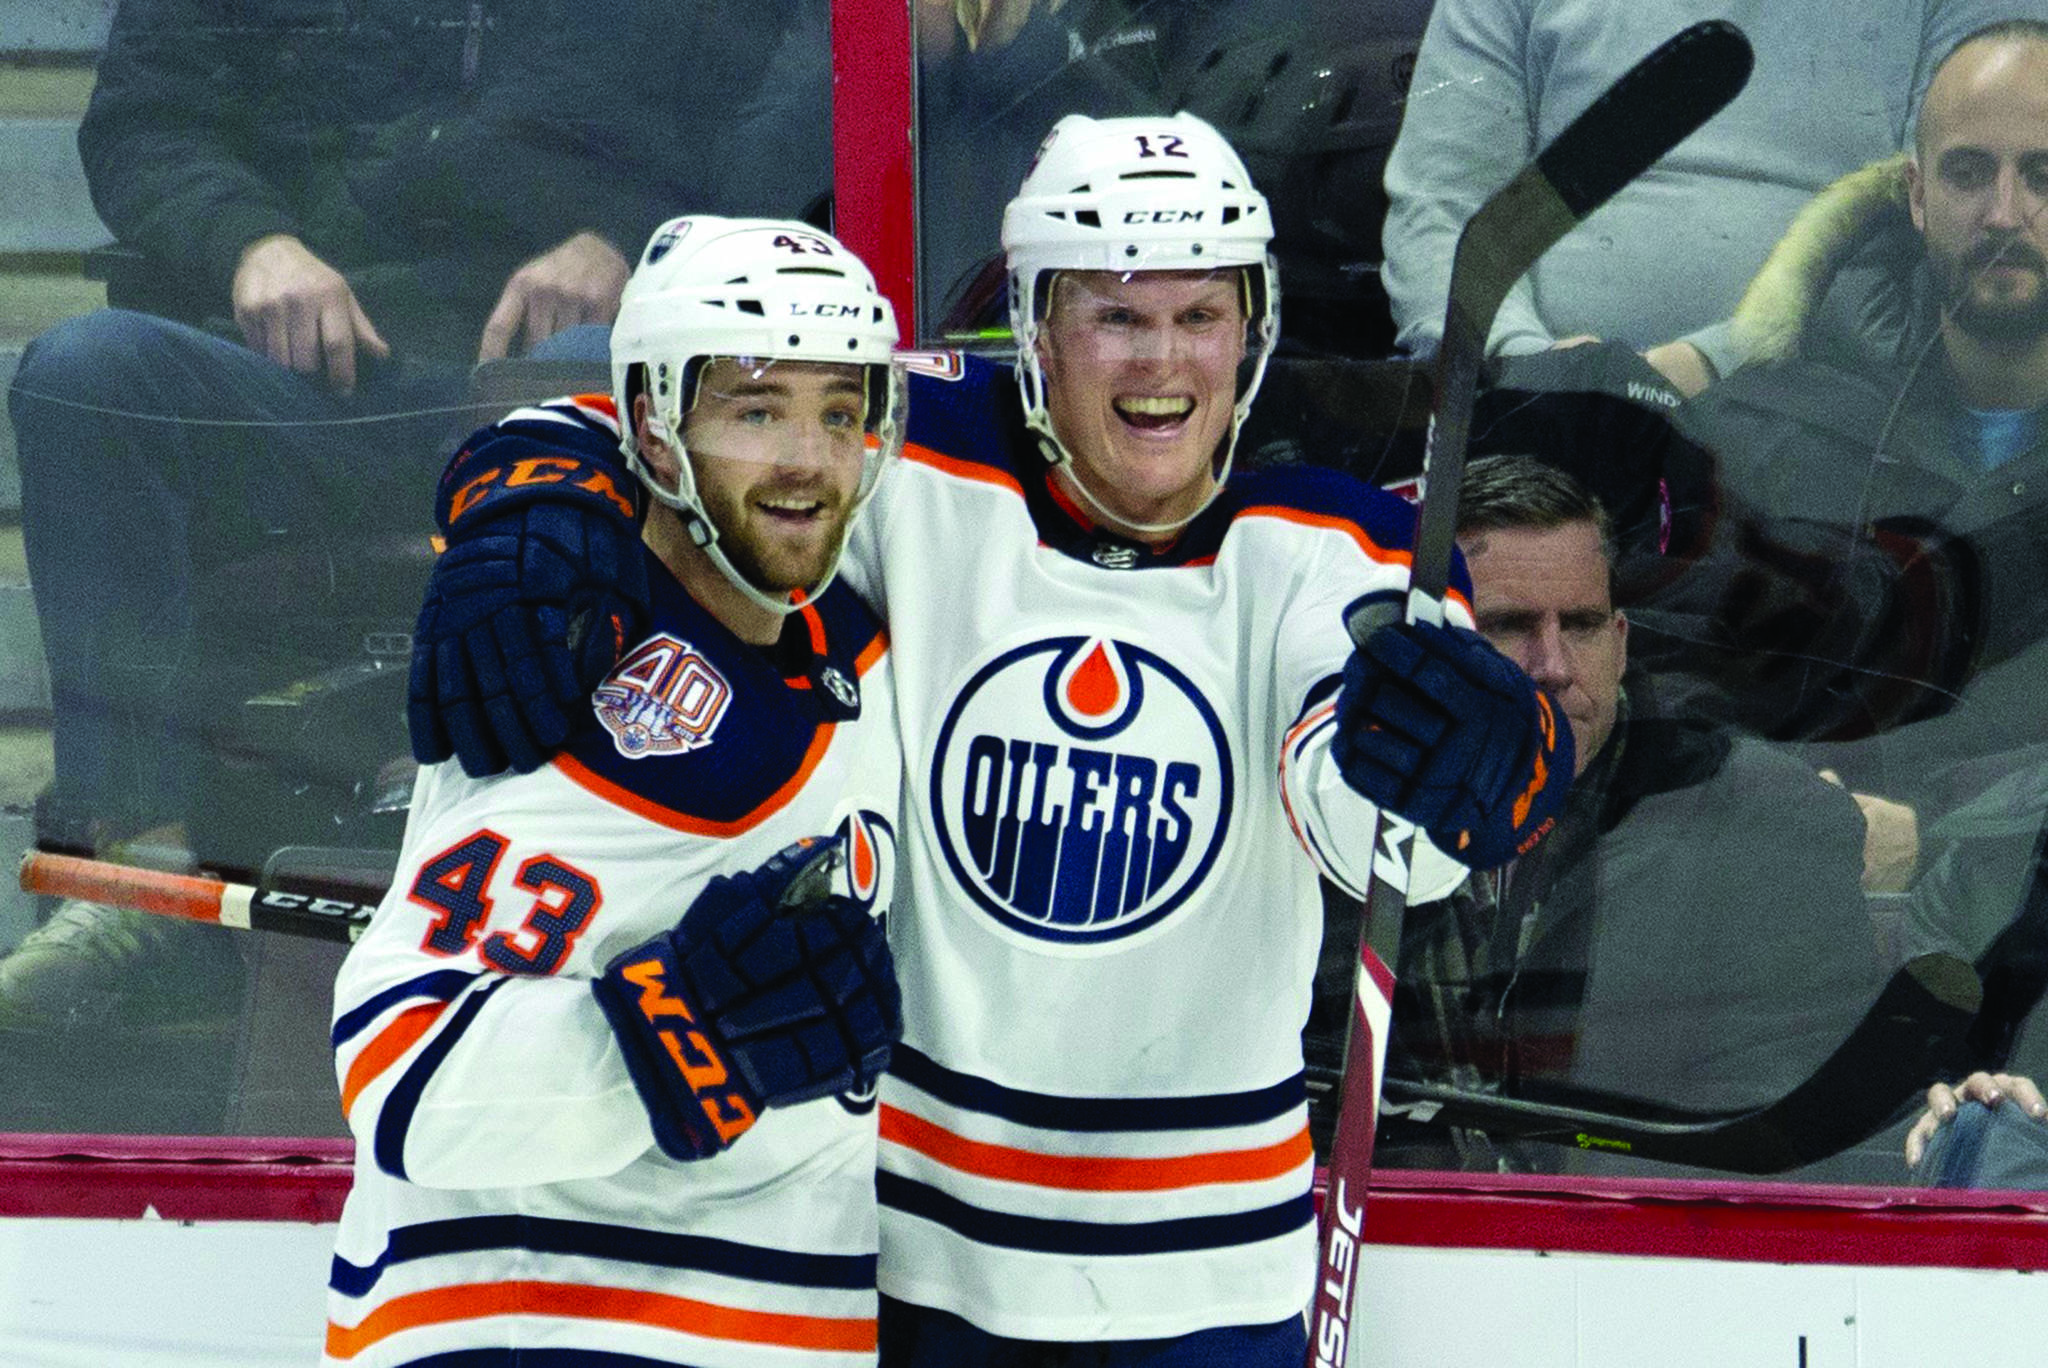 Colby Cave's memory lives on with family, Oilers a year after tragic death